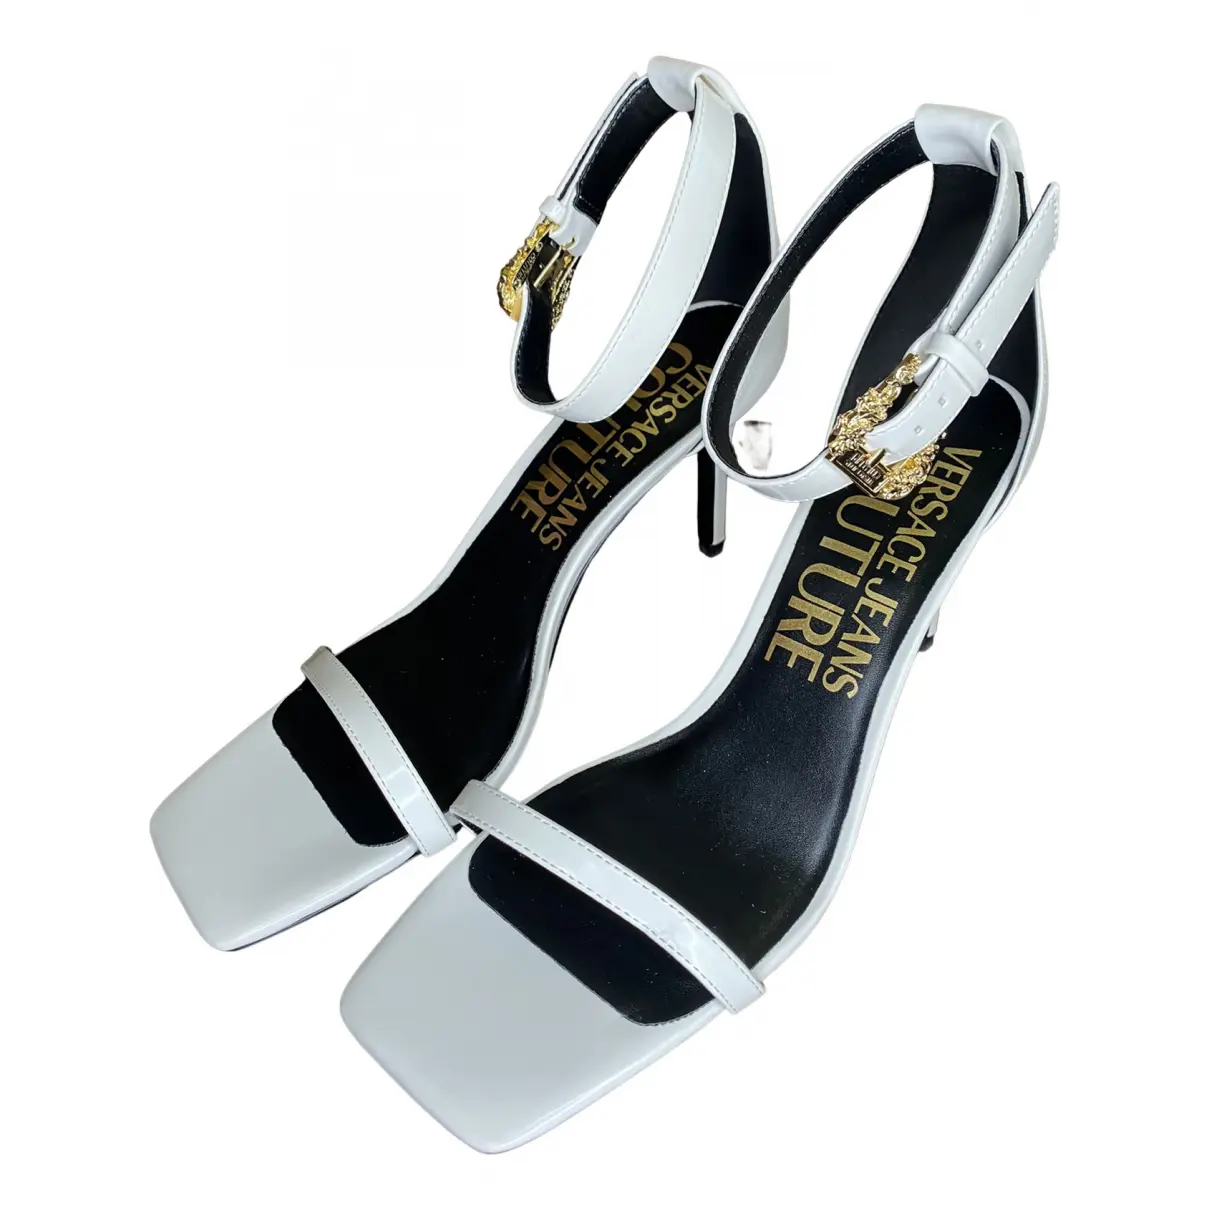 Leather sandals Versace Jeans Couture